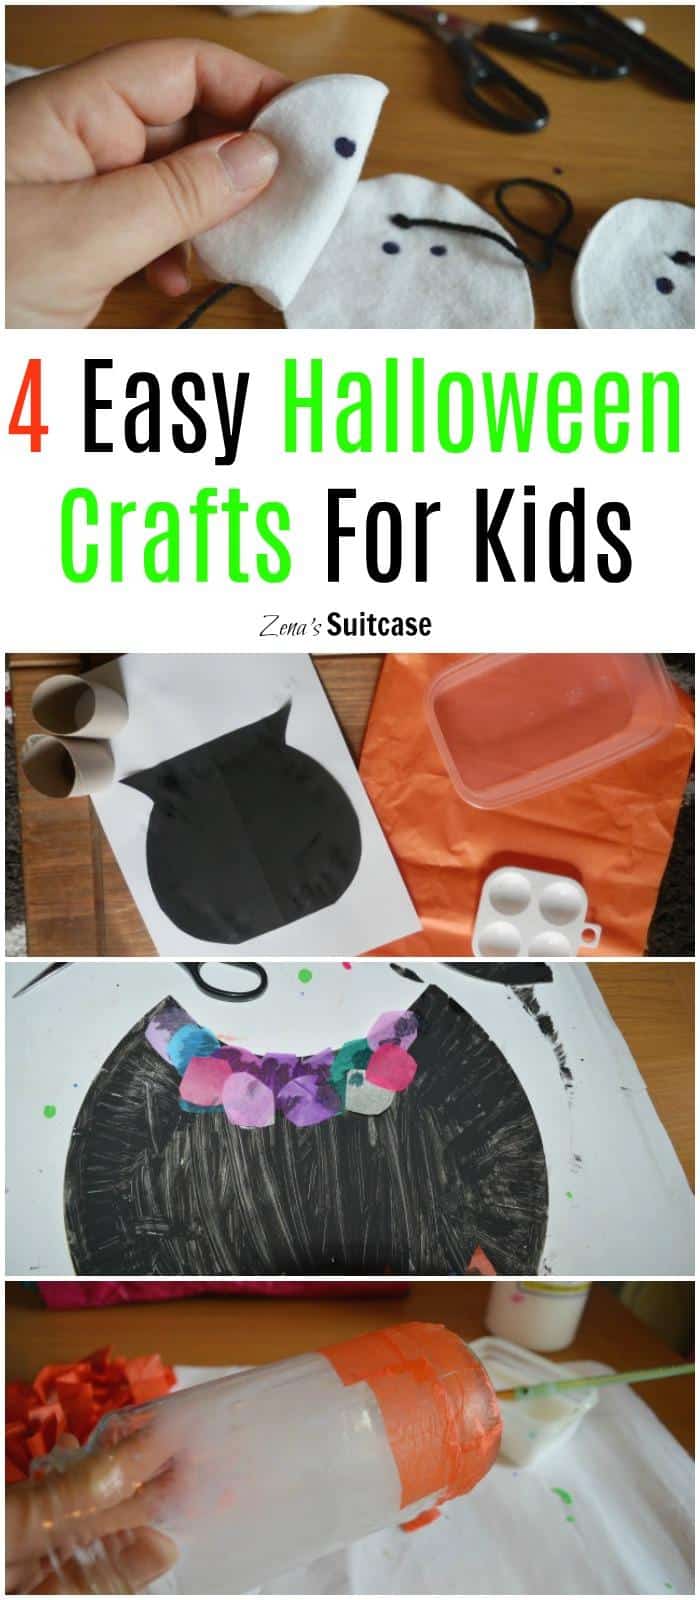 4 Easy Halloween Crafts For Kids